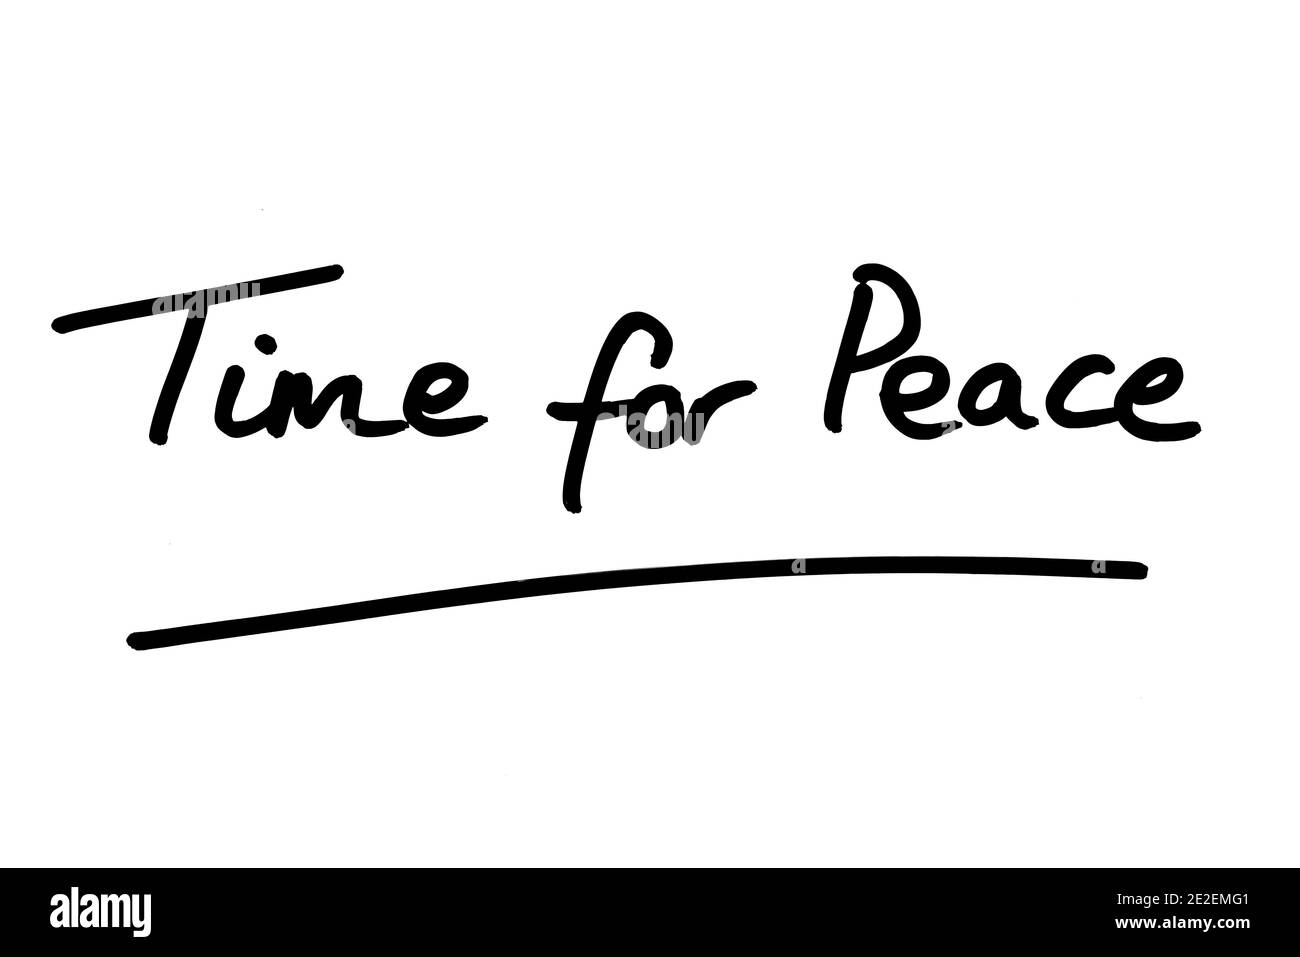 Time for Peace, handwritten on a white background. Stock Photo